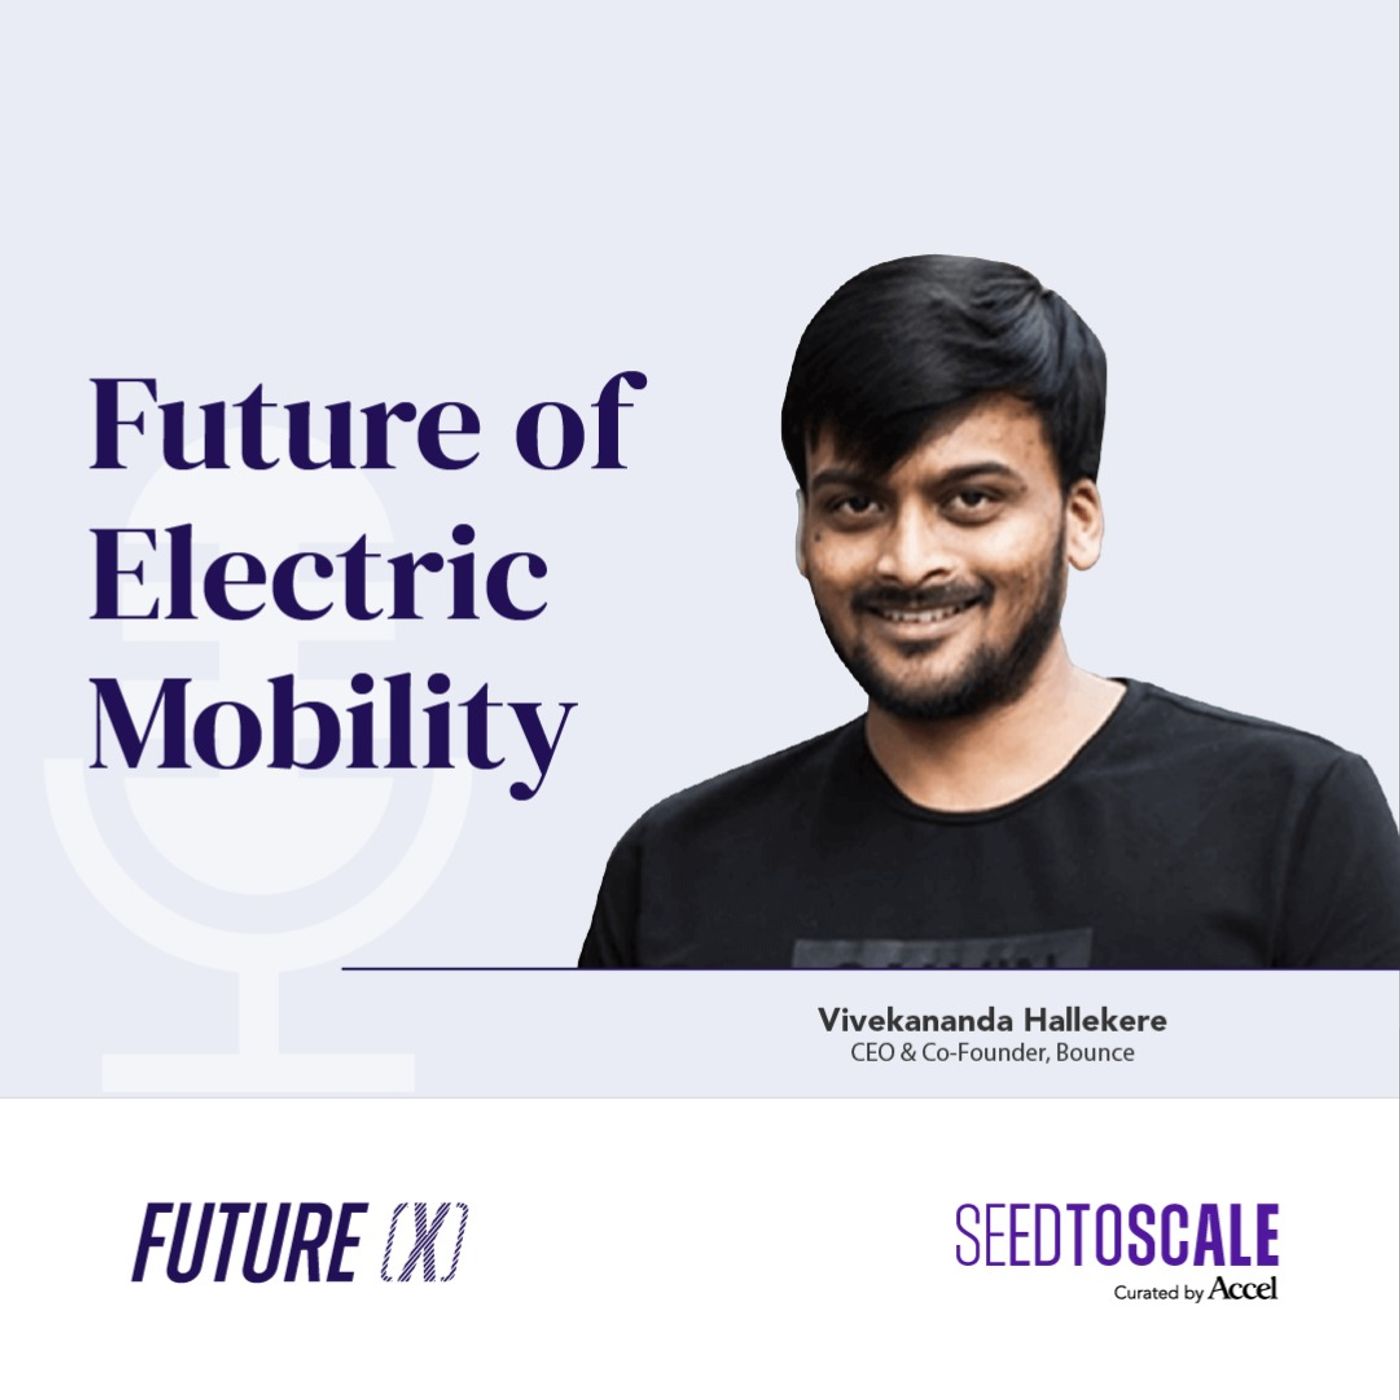 Insights #78: Future of Electric Mobility | Vivek on Bounce’s Journey & Inevitable Adoption of EVs